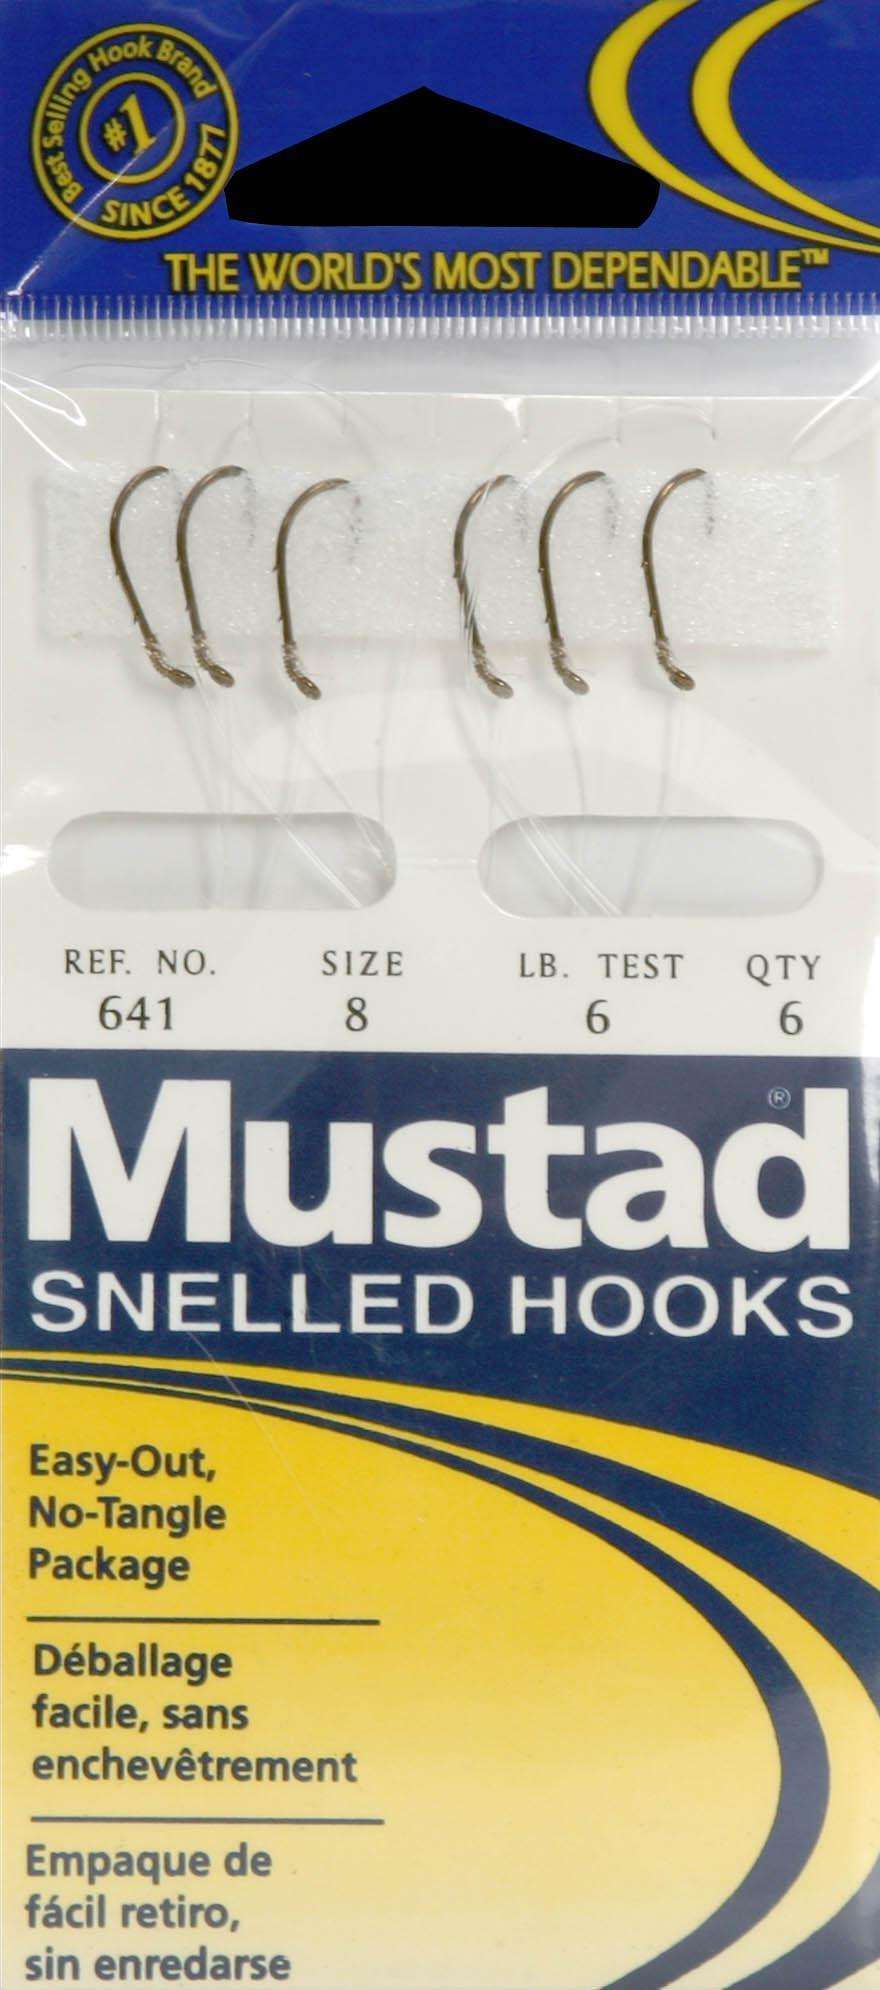 Mustad Snelled Hooks Size 2 Easy-Out No-Tangle Package 10 Lb Test 6 Pack New!!! 